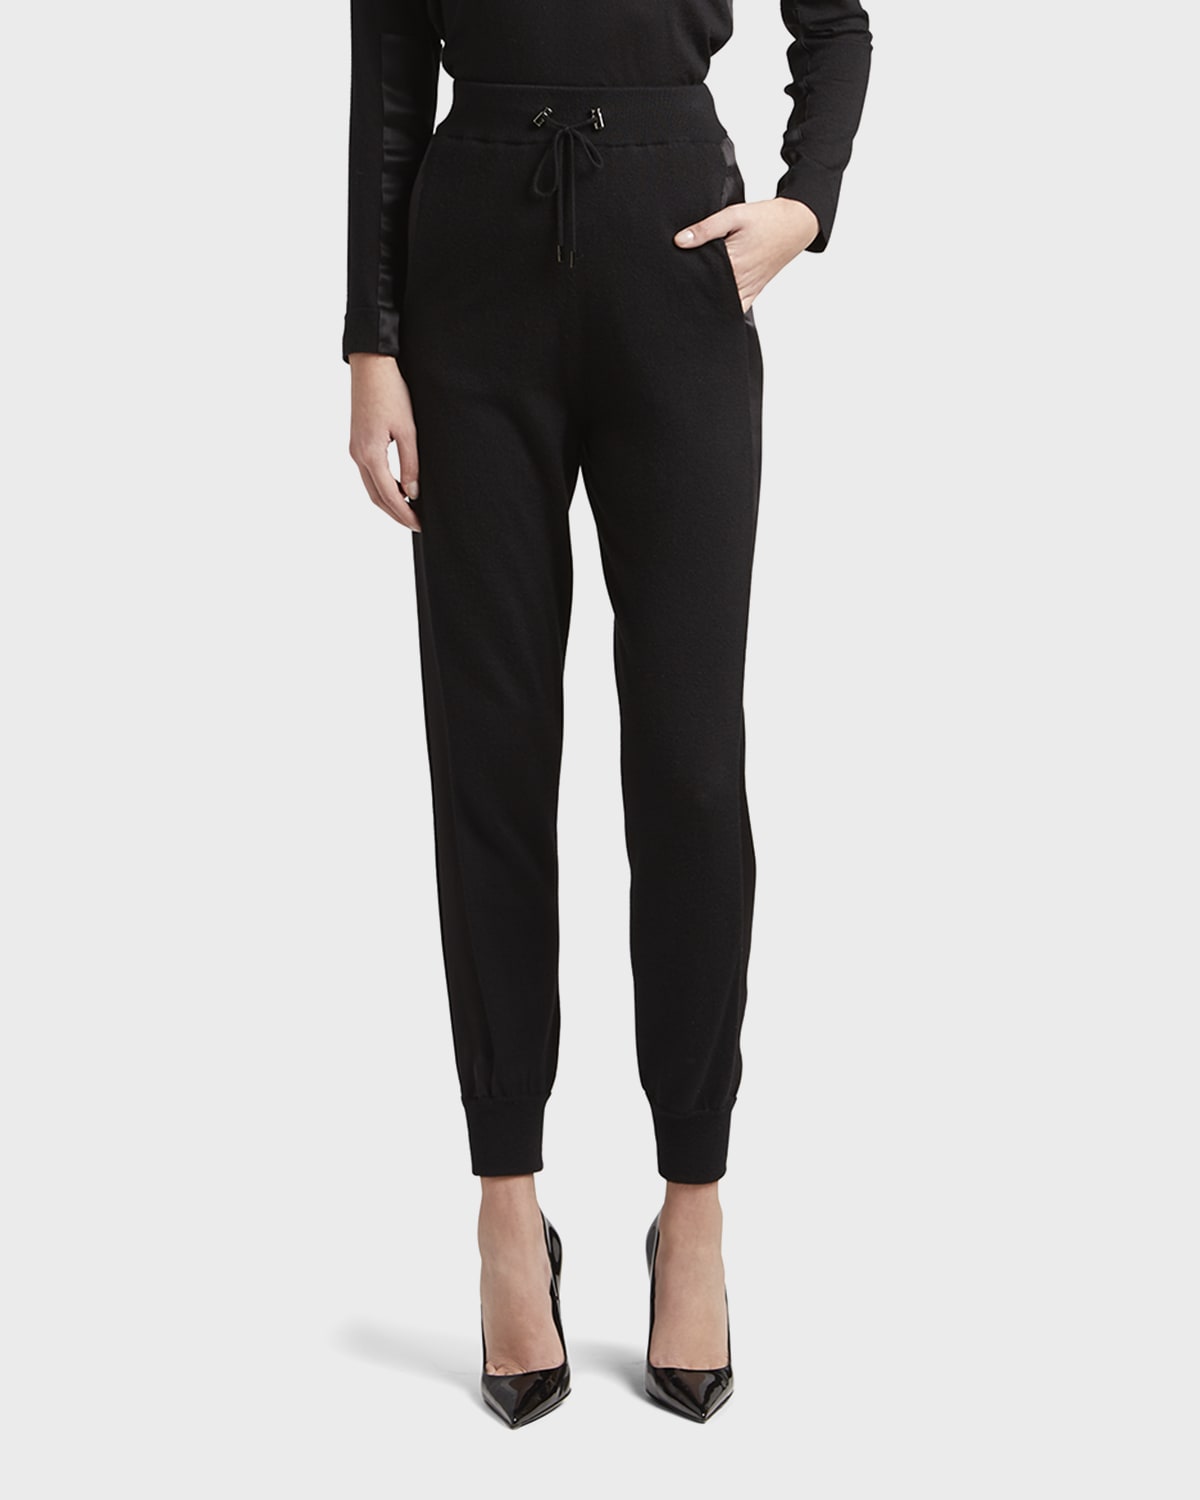 TOM FORD Glossy Metallic Cashmere Ankle Joggers | Neiman Marcus